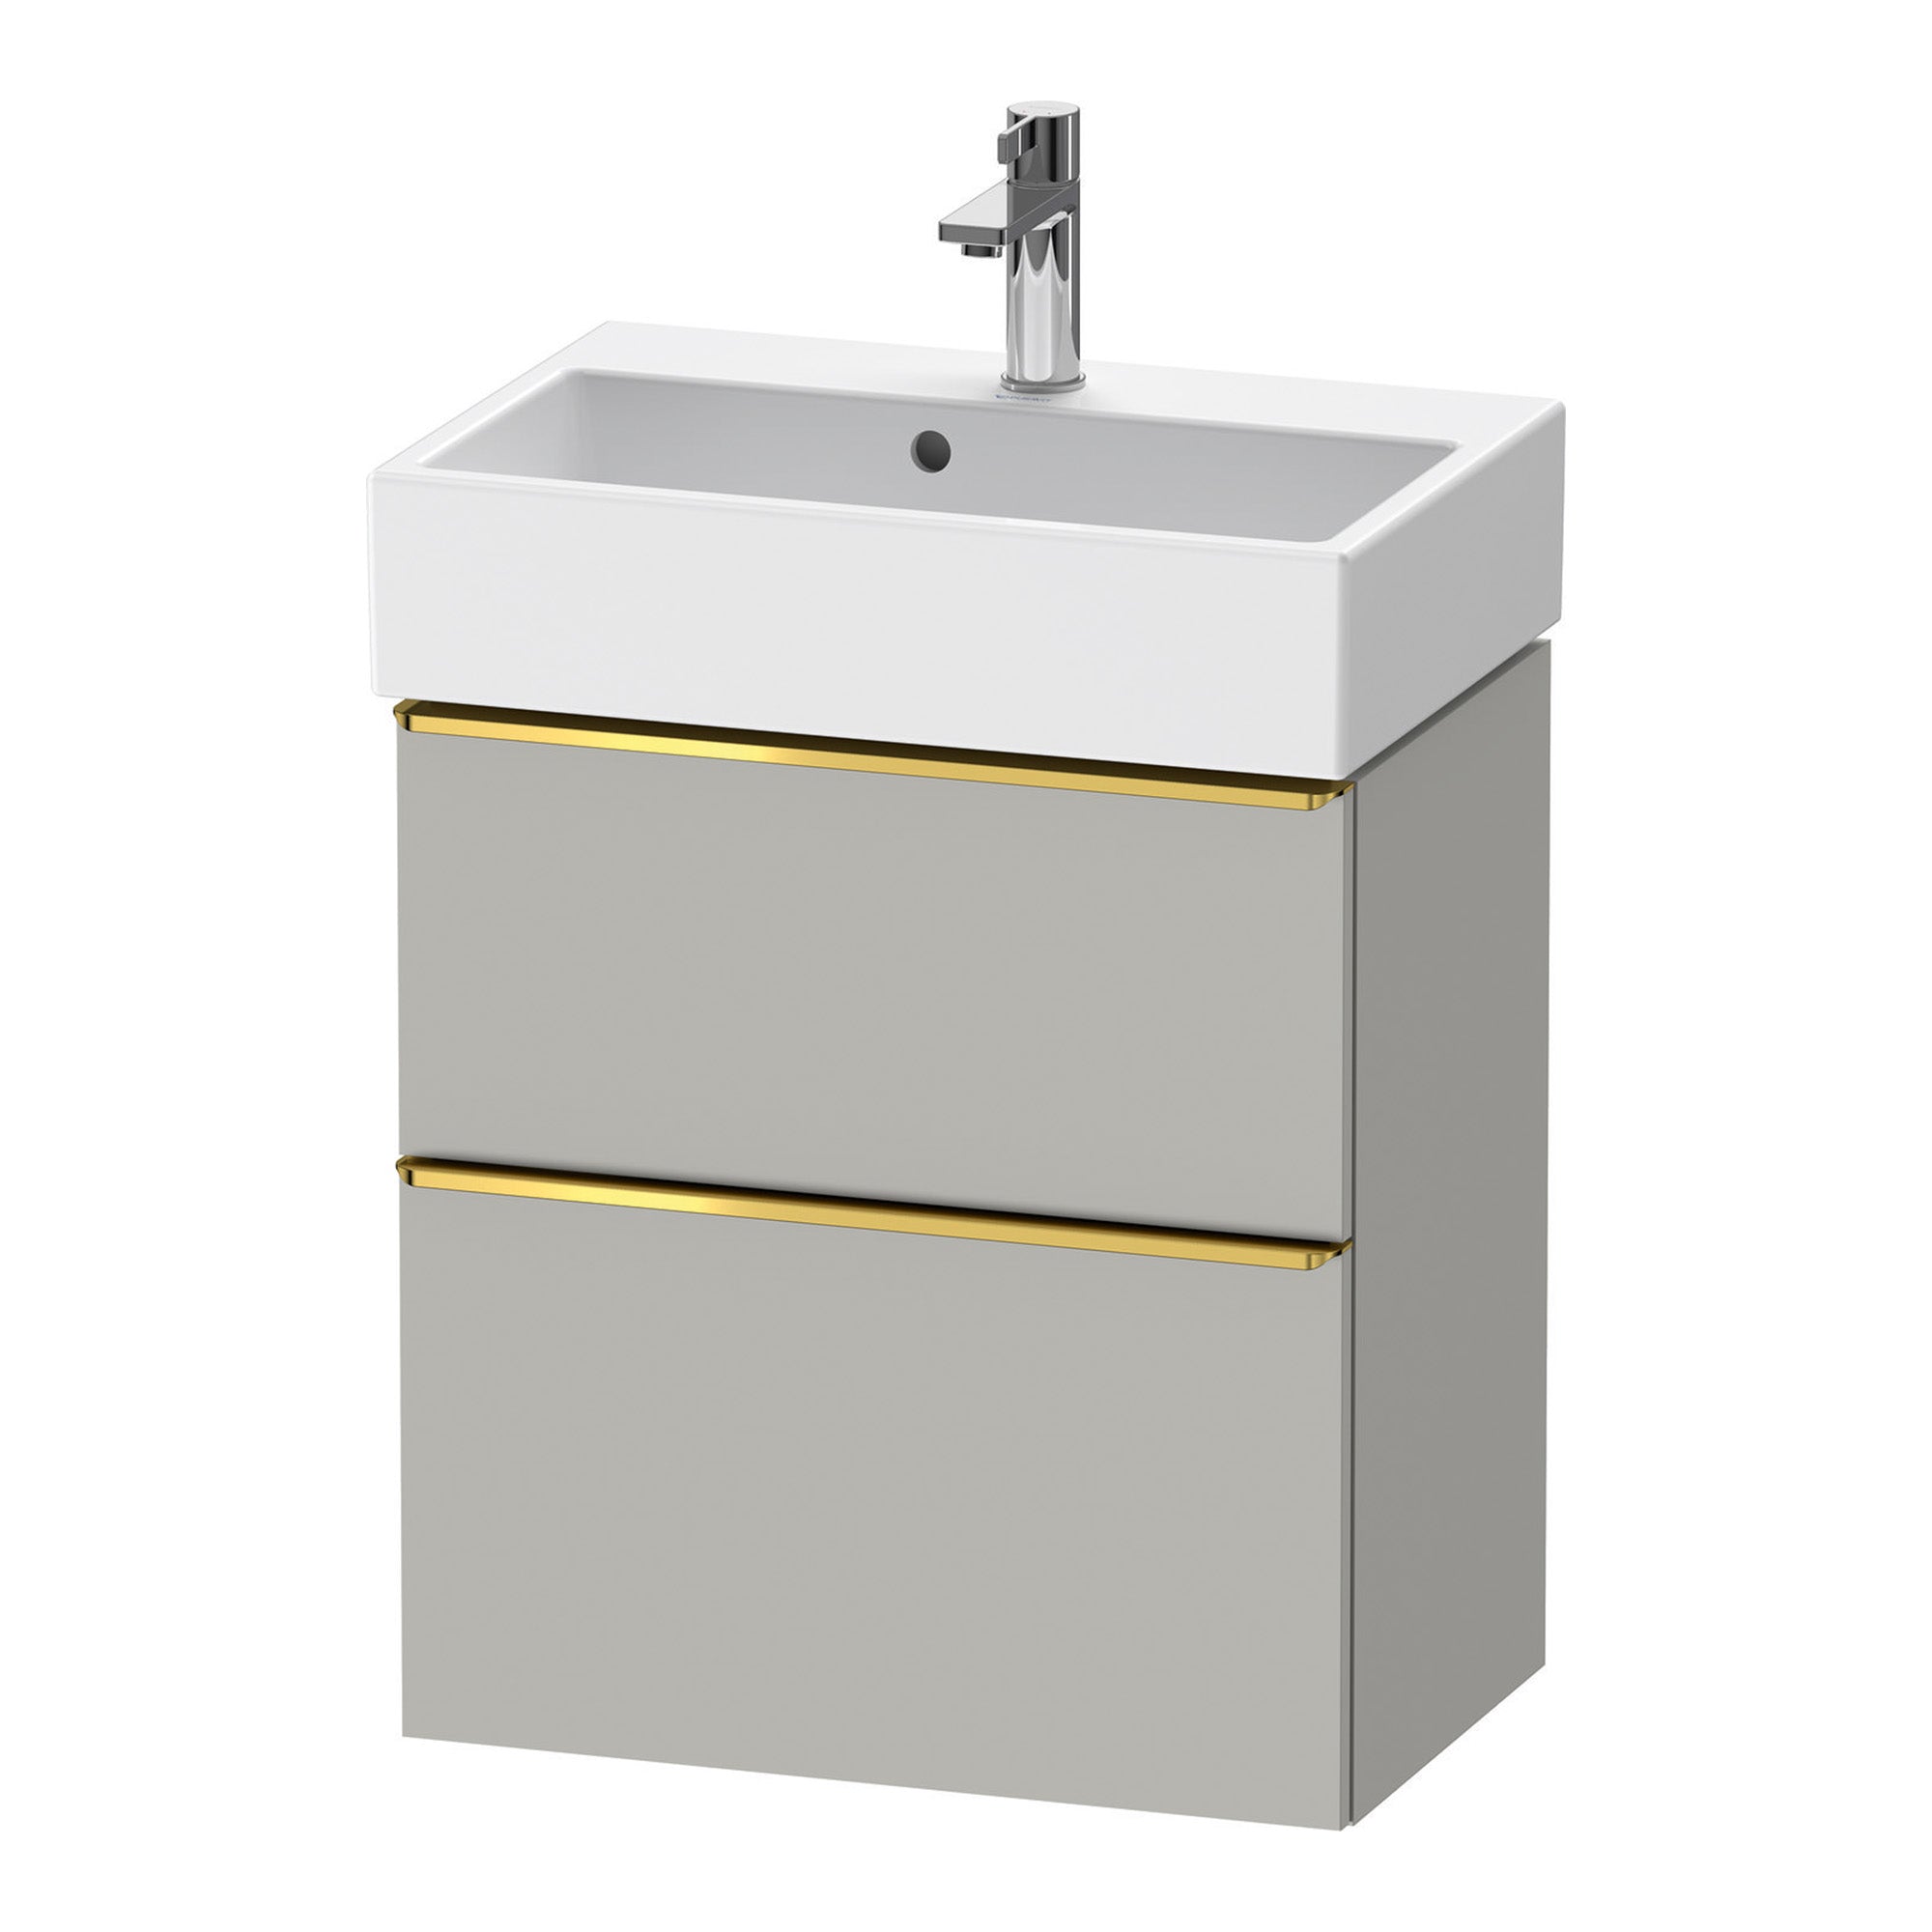 duravit d-neo 600 wall mounted vanity-unit with vero basin concrete grey gold handles